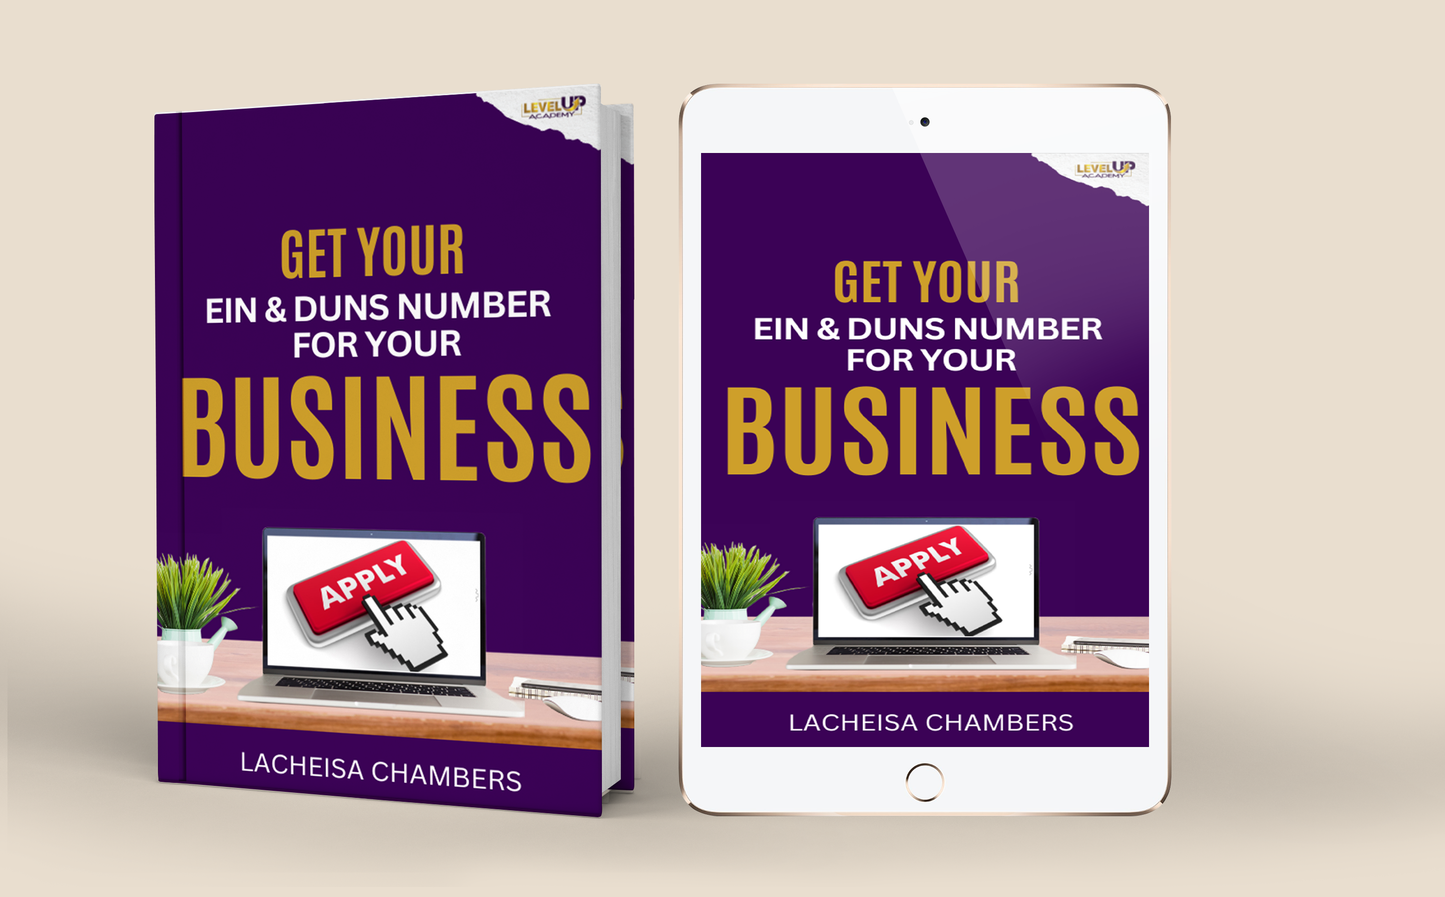 DIY (EIN & DUNS NUMBER DIY) | Get Top-Rated & Best Online Incorporation Services | Best Business Formation & Incorporation Options at LEVEL UP ACADEMY